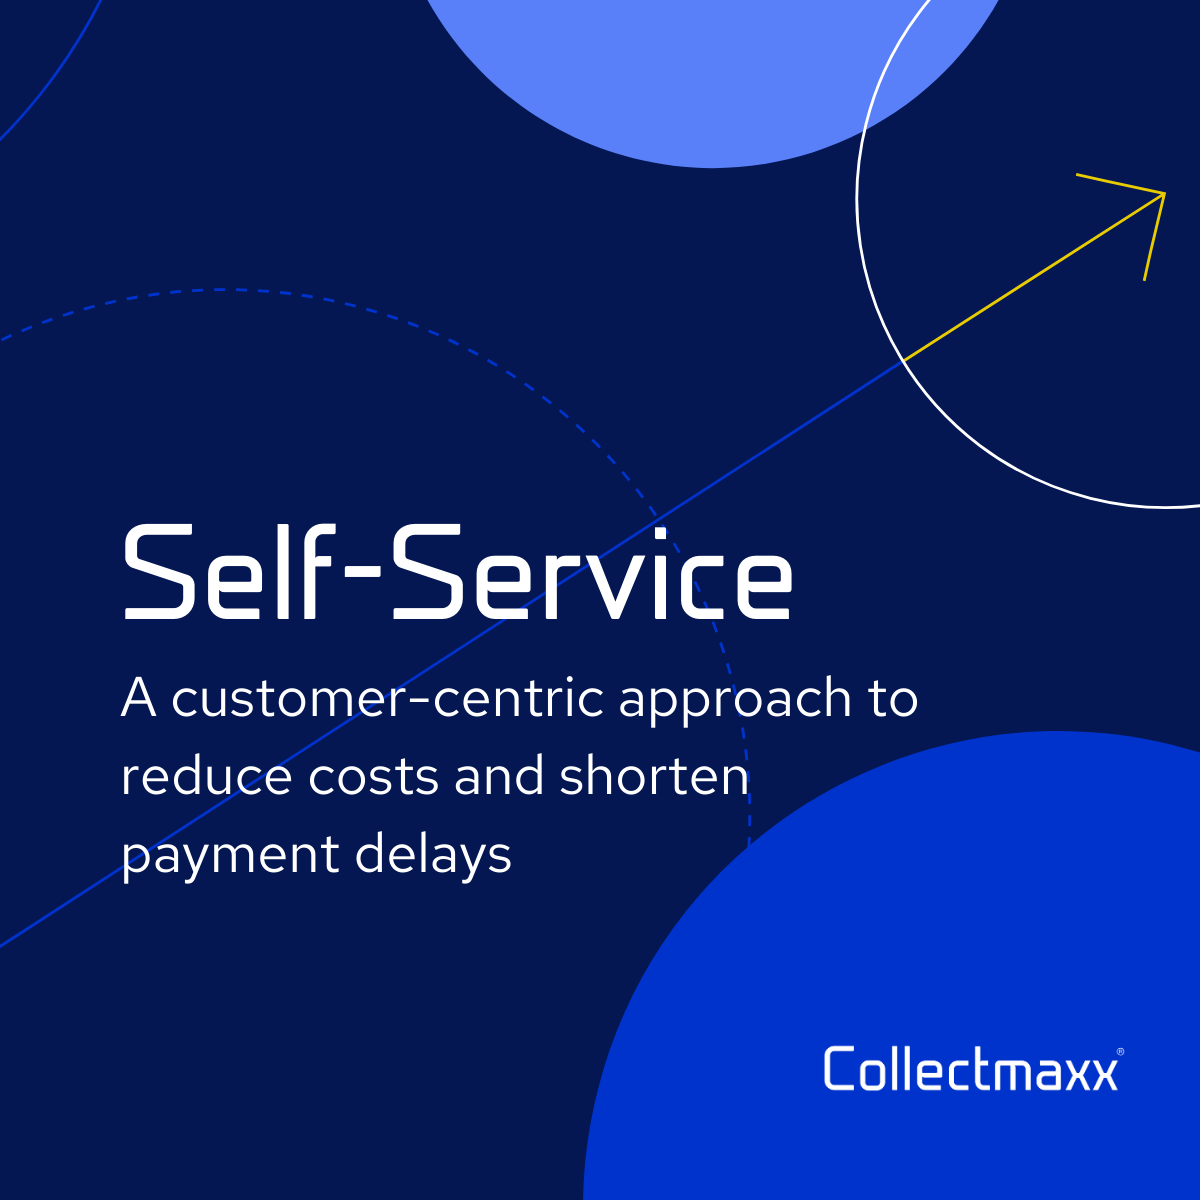 A customer-centric approach to reduce costs and shorten payment delays